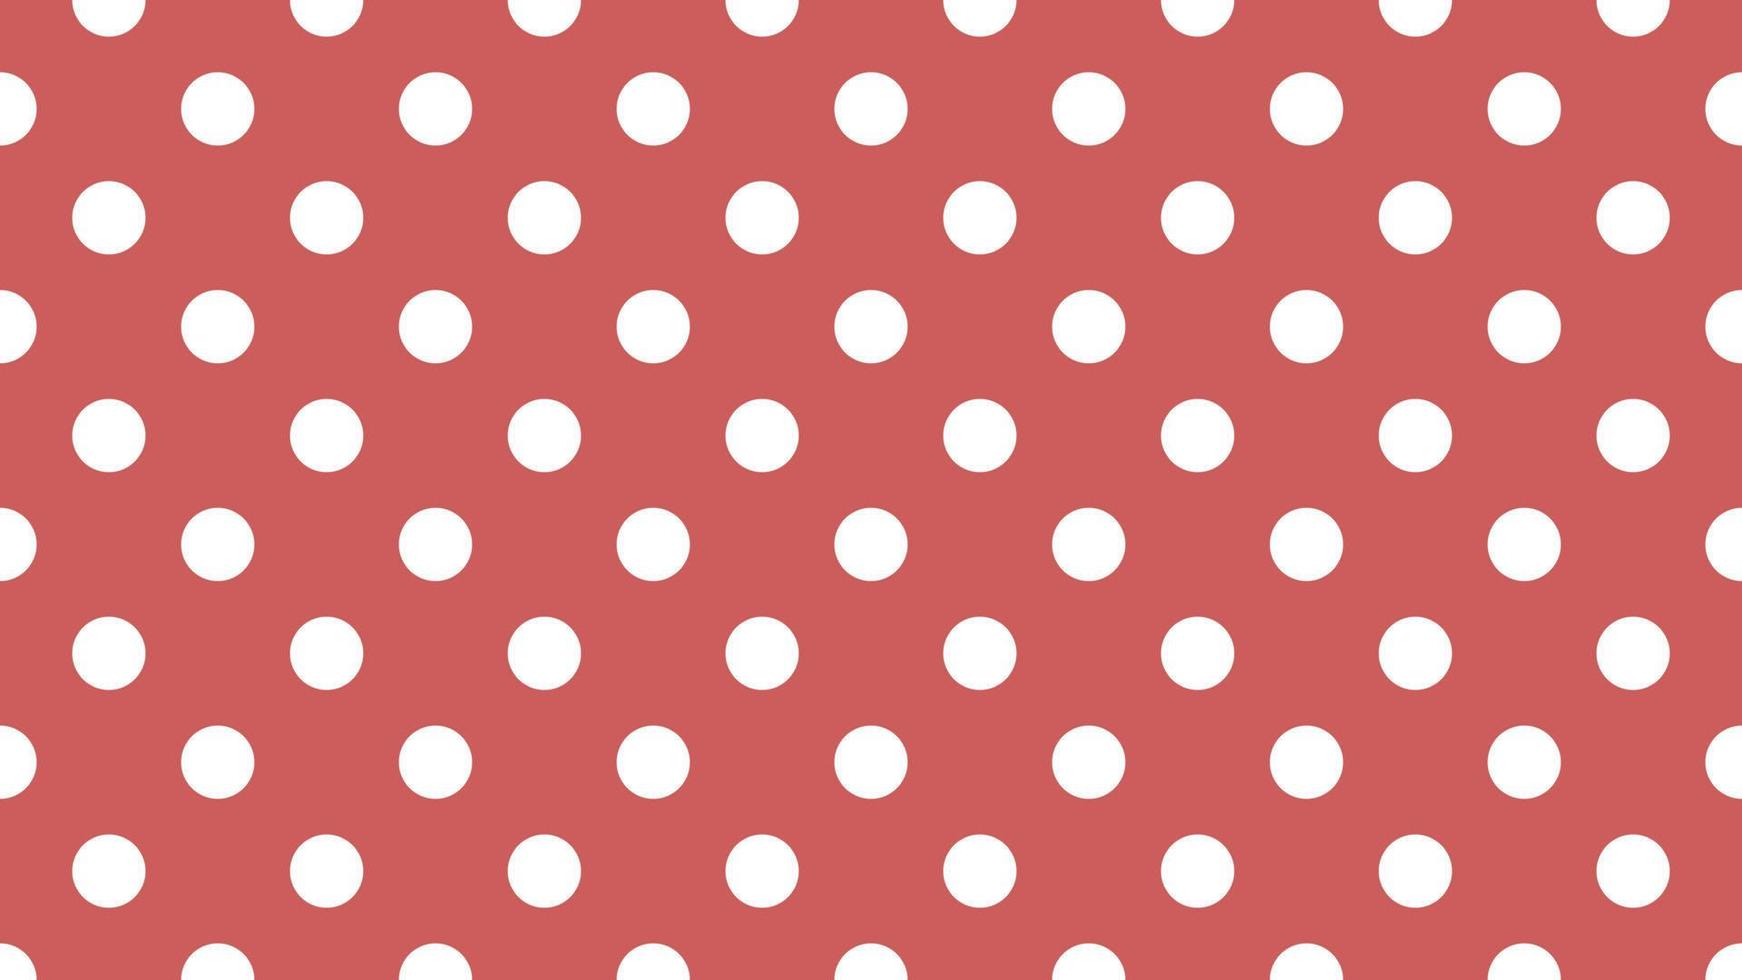 white color polka dots over indian red background vector